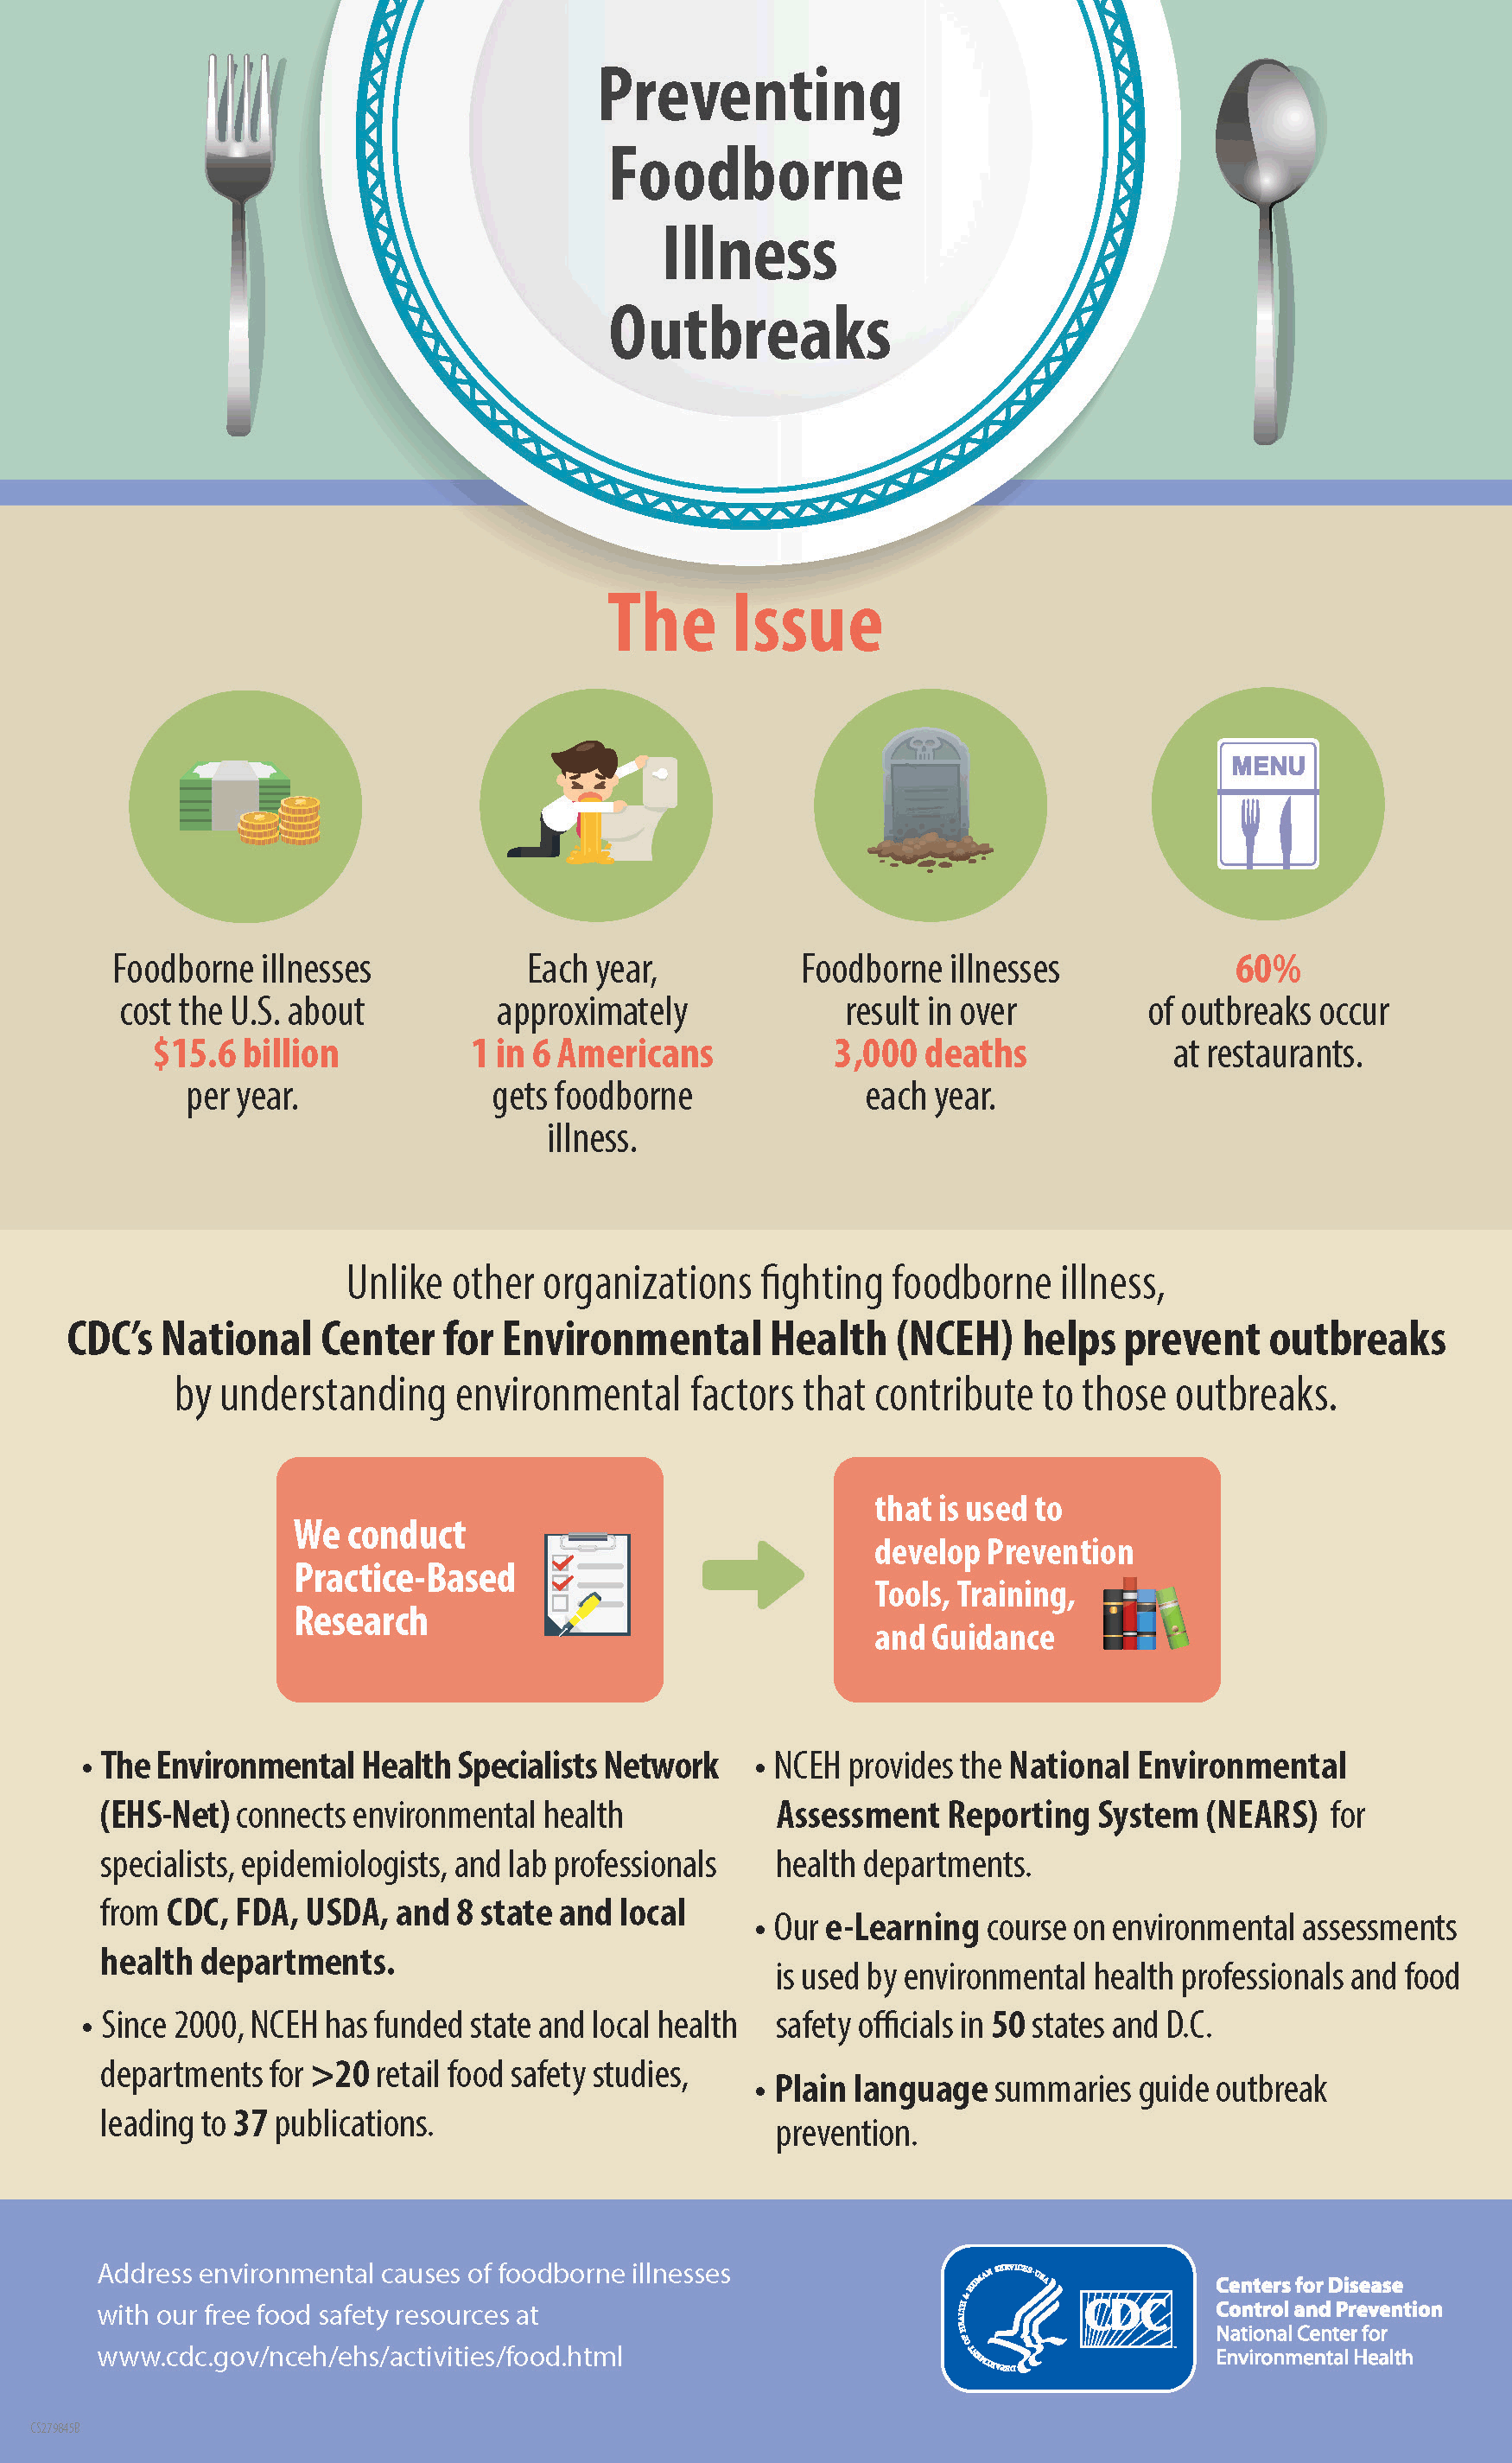 Page 1 of the infographic on Preventing Foodborne Illness Outbreaks